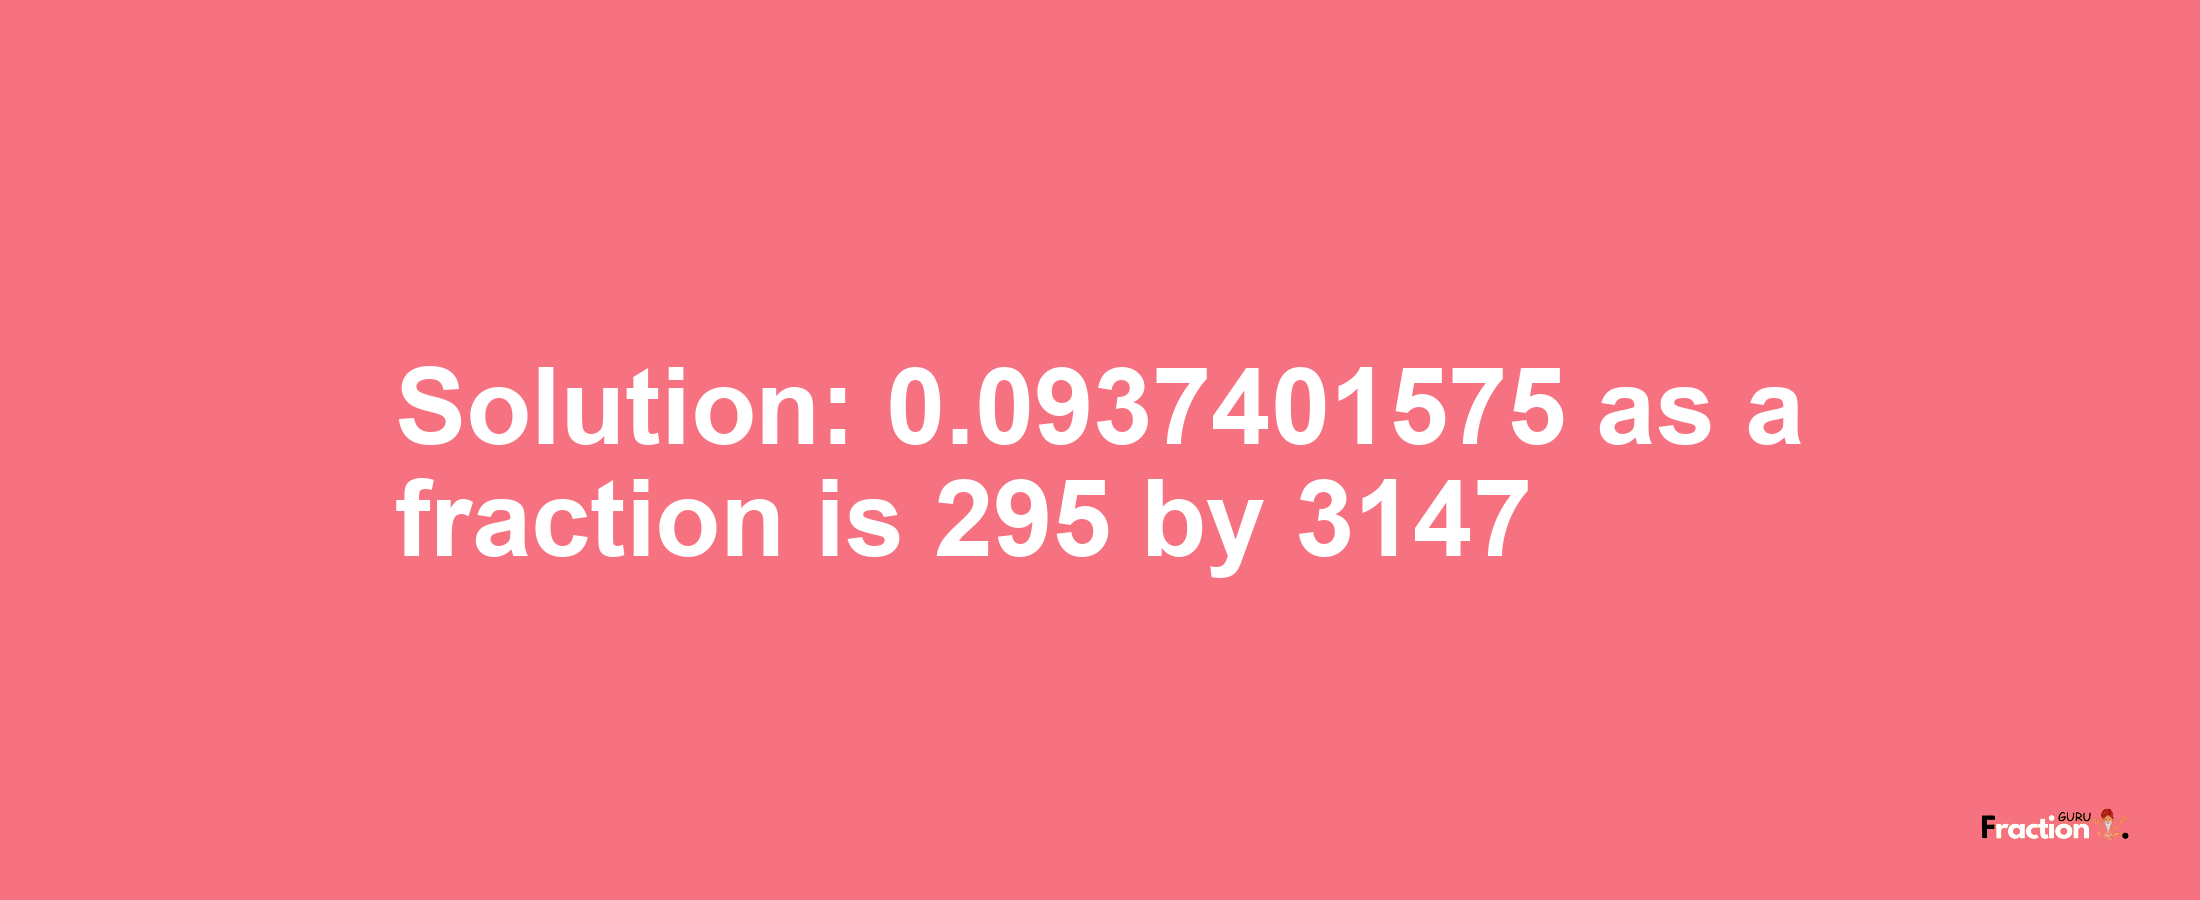 Solution:0.0937401575 as a fraction is 295/3147